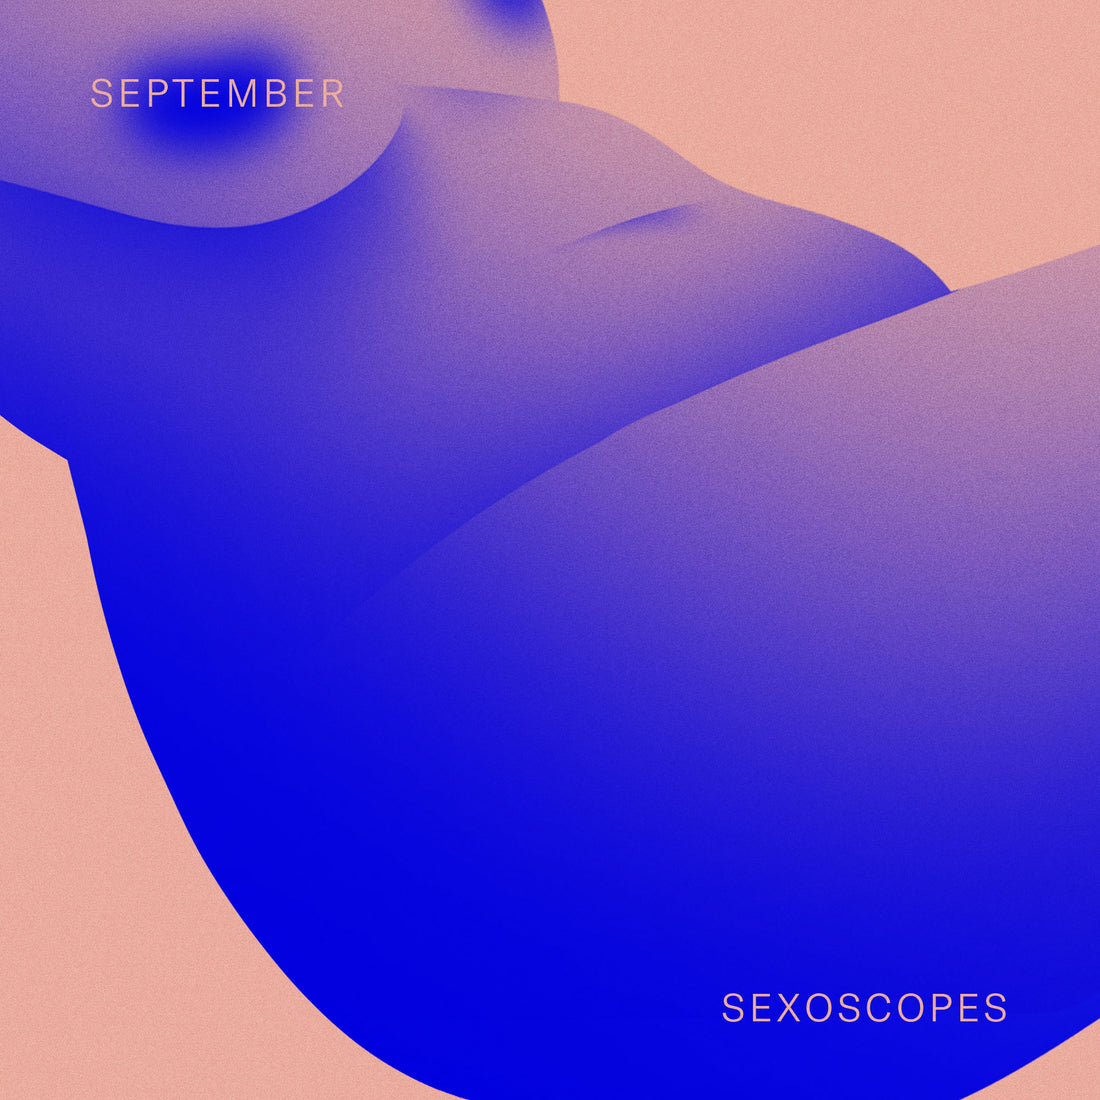 image shows a blue naked curvy torso reclined against a salmon colored backdrop with text reading "september sexoscopes"